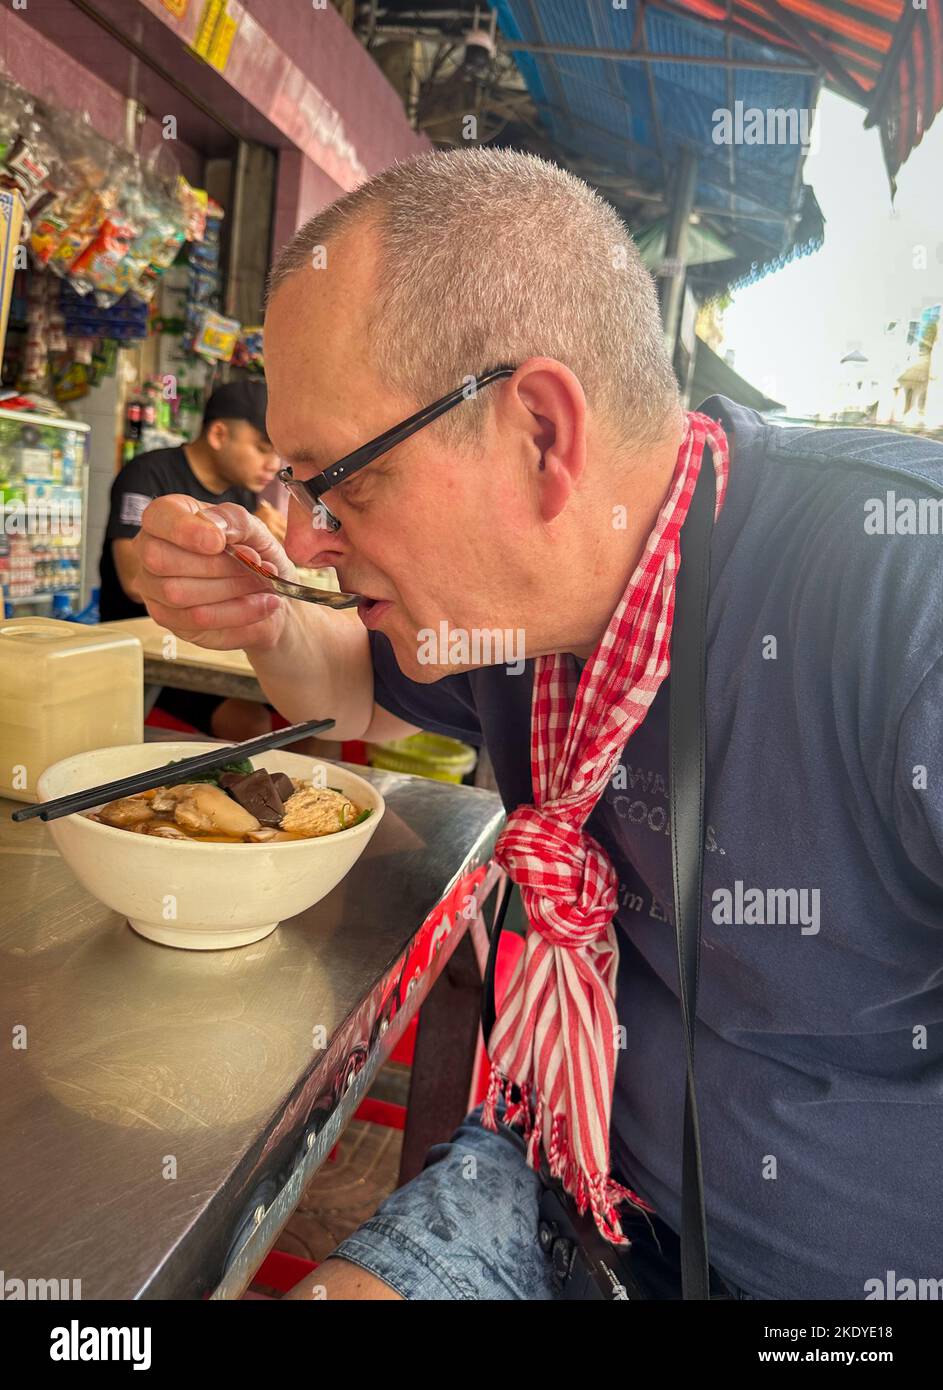 A middle-aged foreign tourist eats a bowl of bun rieu, a form of Vietnamese noodle soup, in central Phnom Penh, Cambodia. Stock Photo